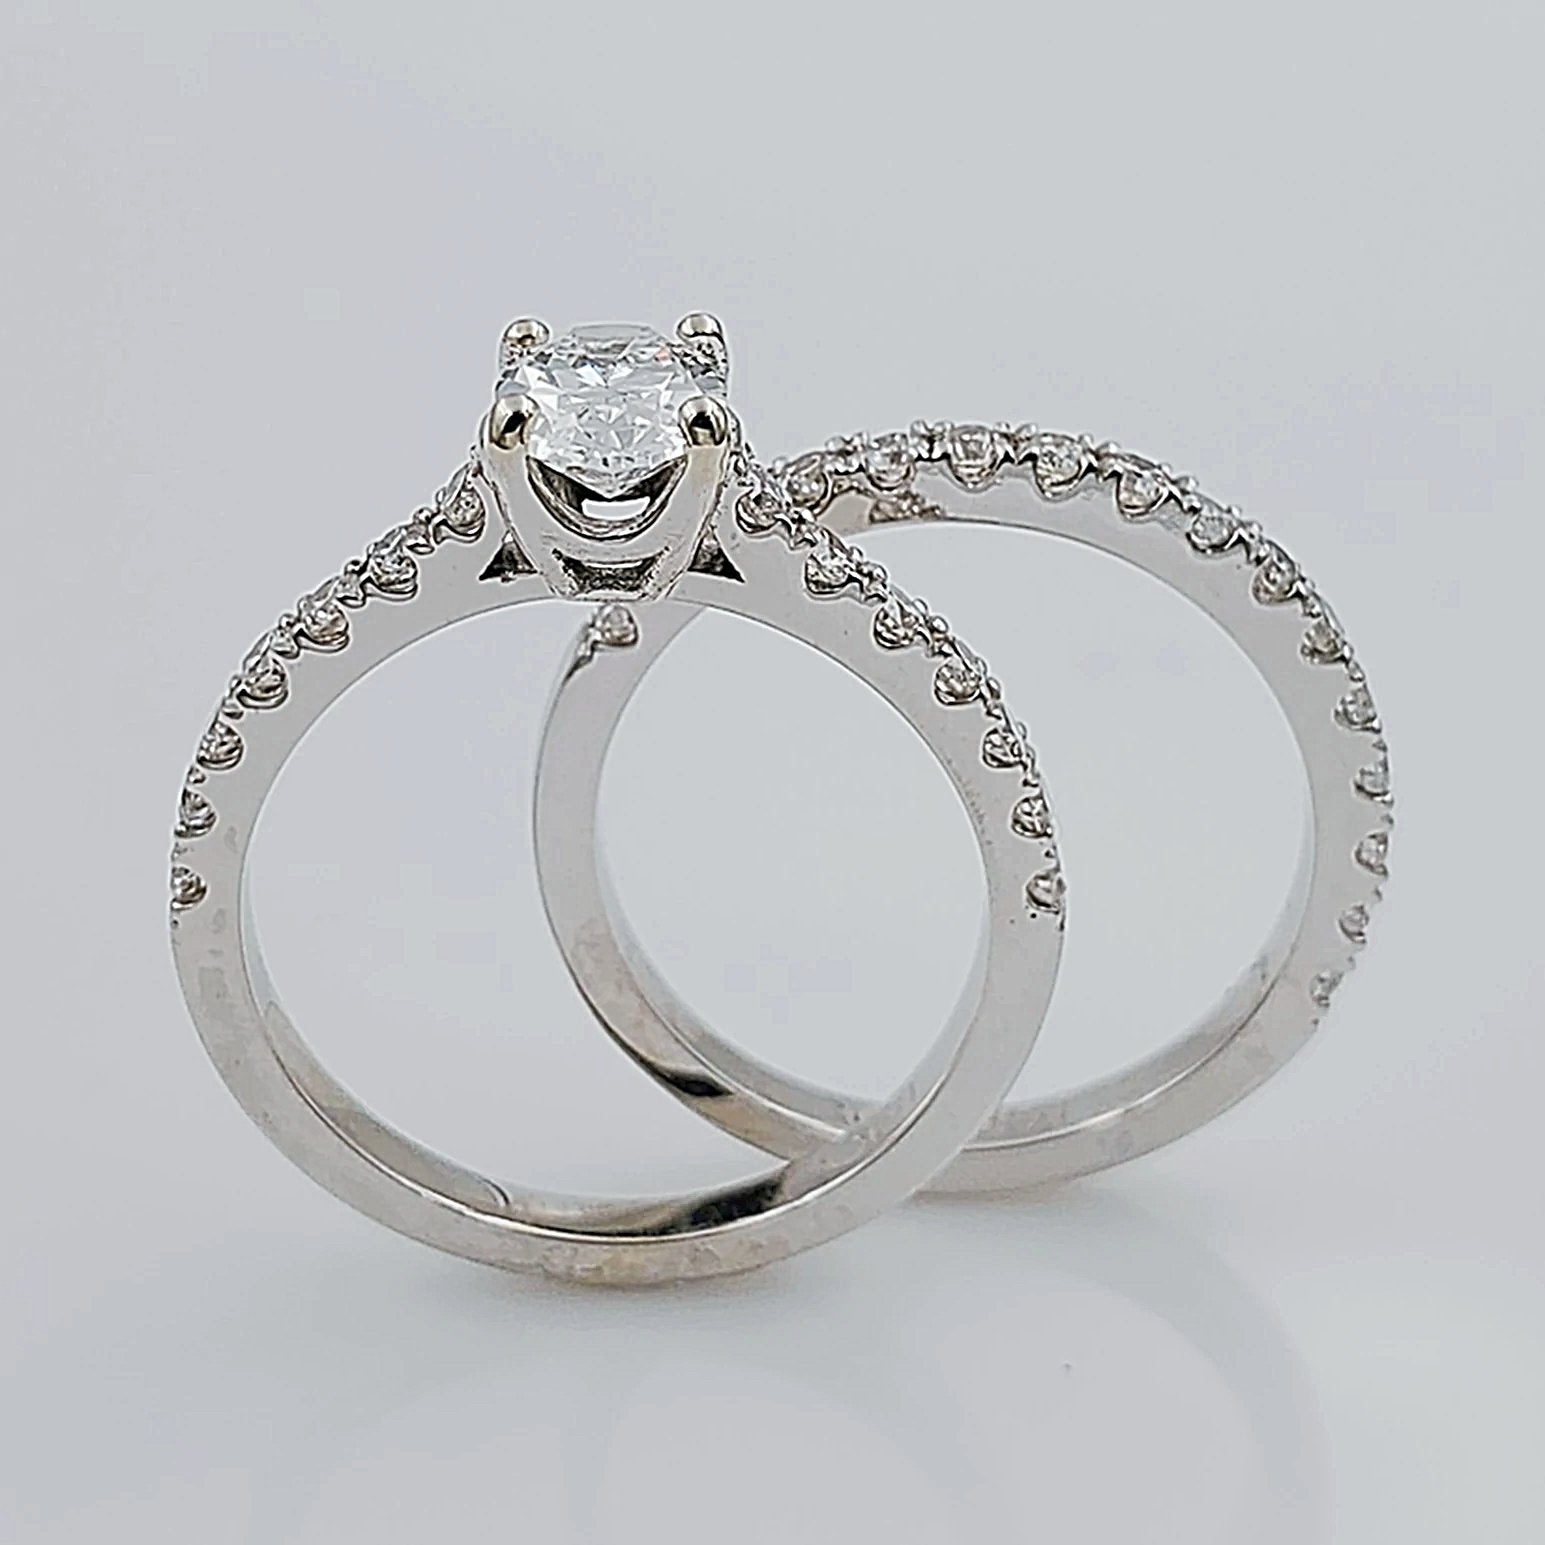 Women's 14K White Gold with Oval 0.65 CT Center (SI Color H) Diamond 4.6 GR Total Weight Bridal Ring Set. (Size: 6.25)